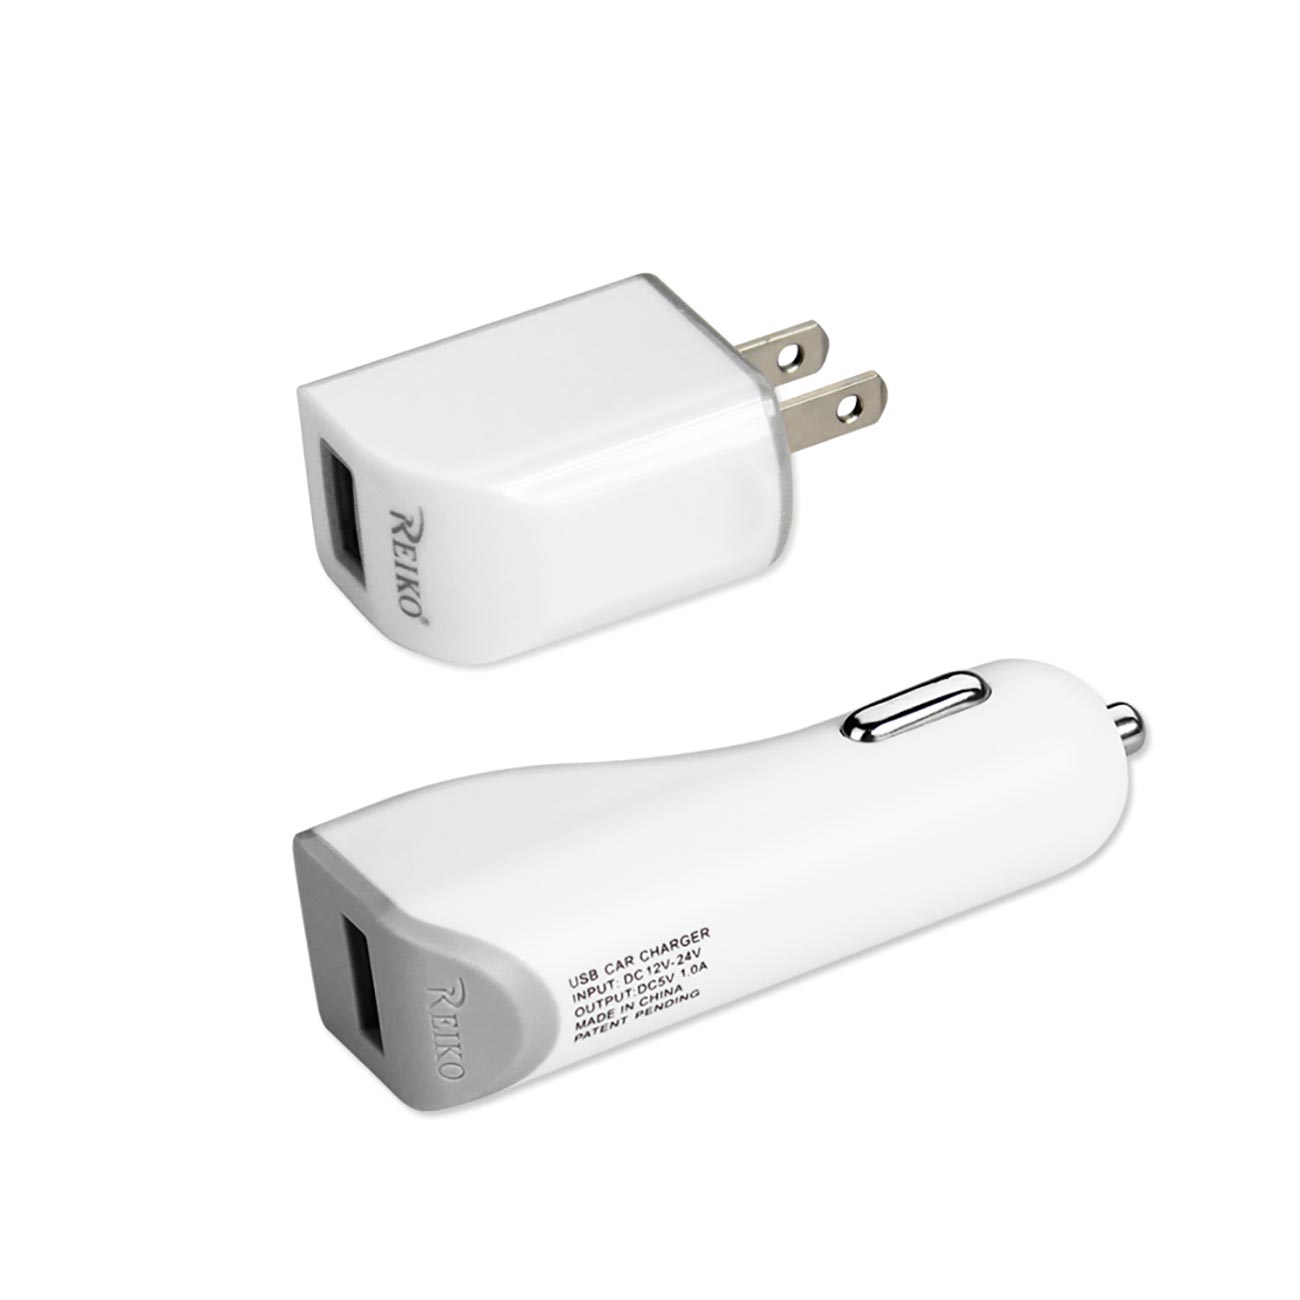 Car Charger Wall Adapter With Cable 3-In-1 iPhone 4G 1A White Color